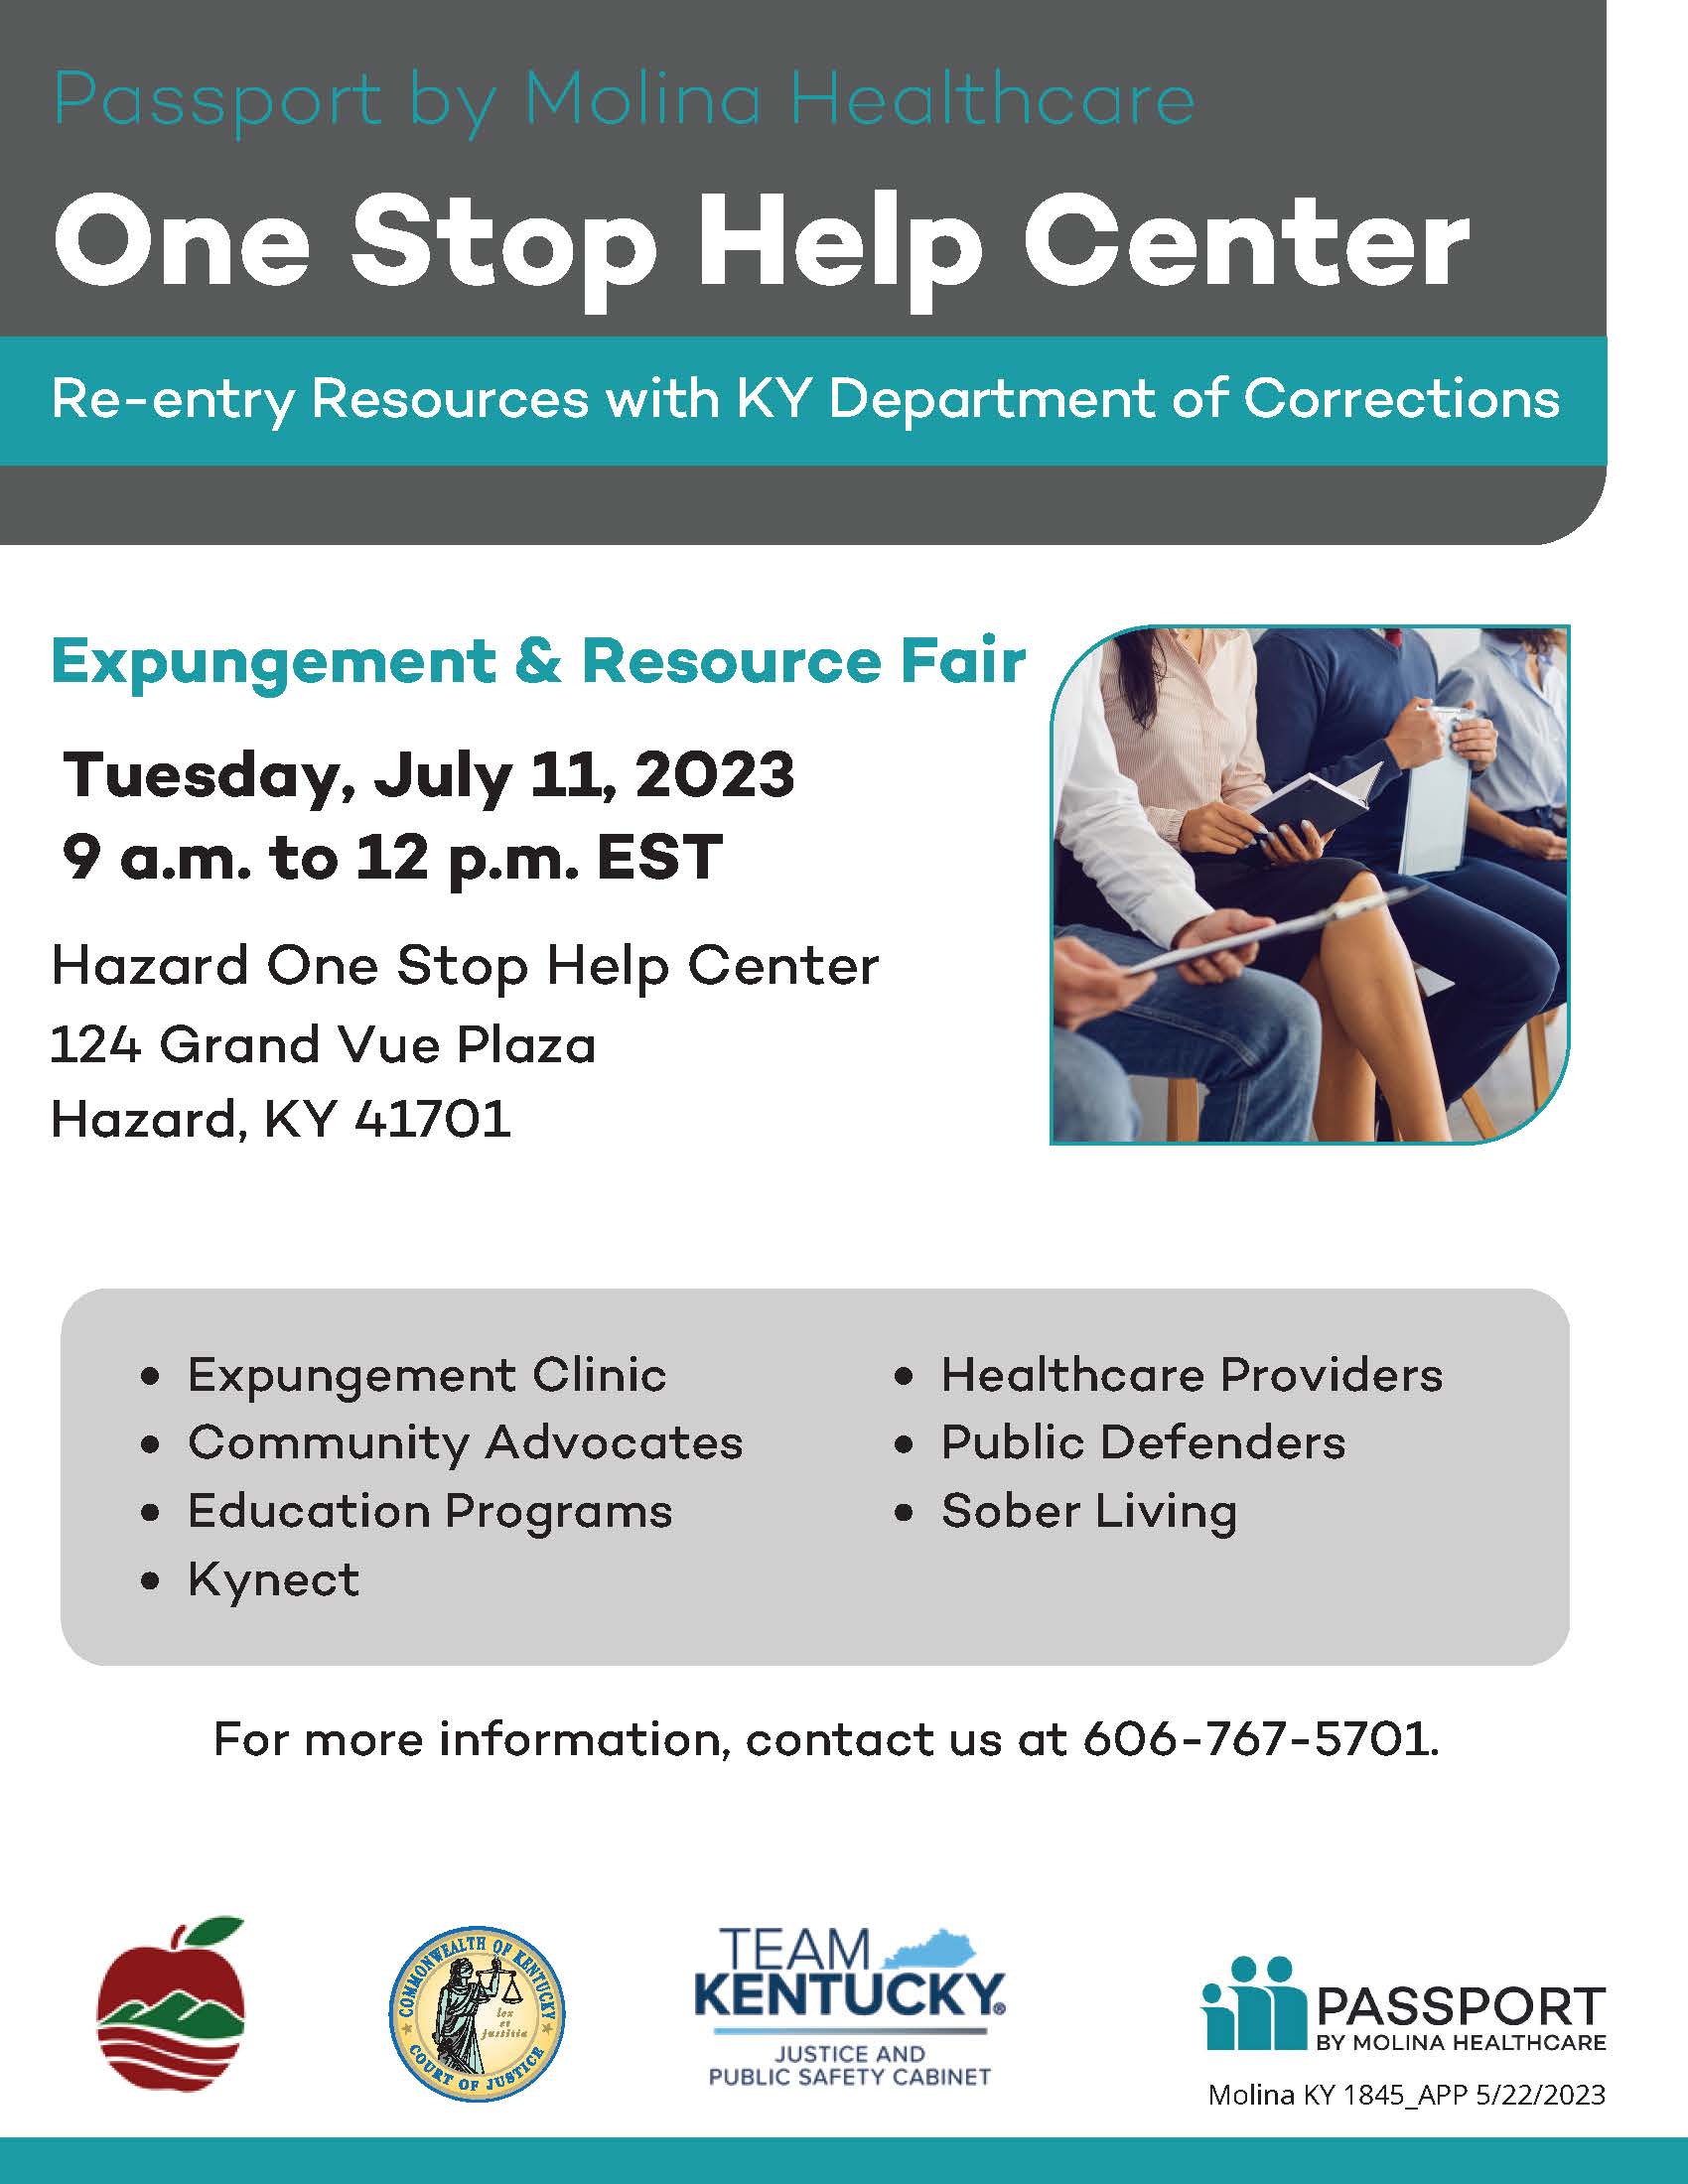 Flyer for expungement clinic on July 11